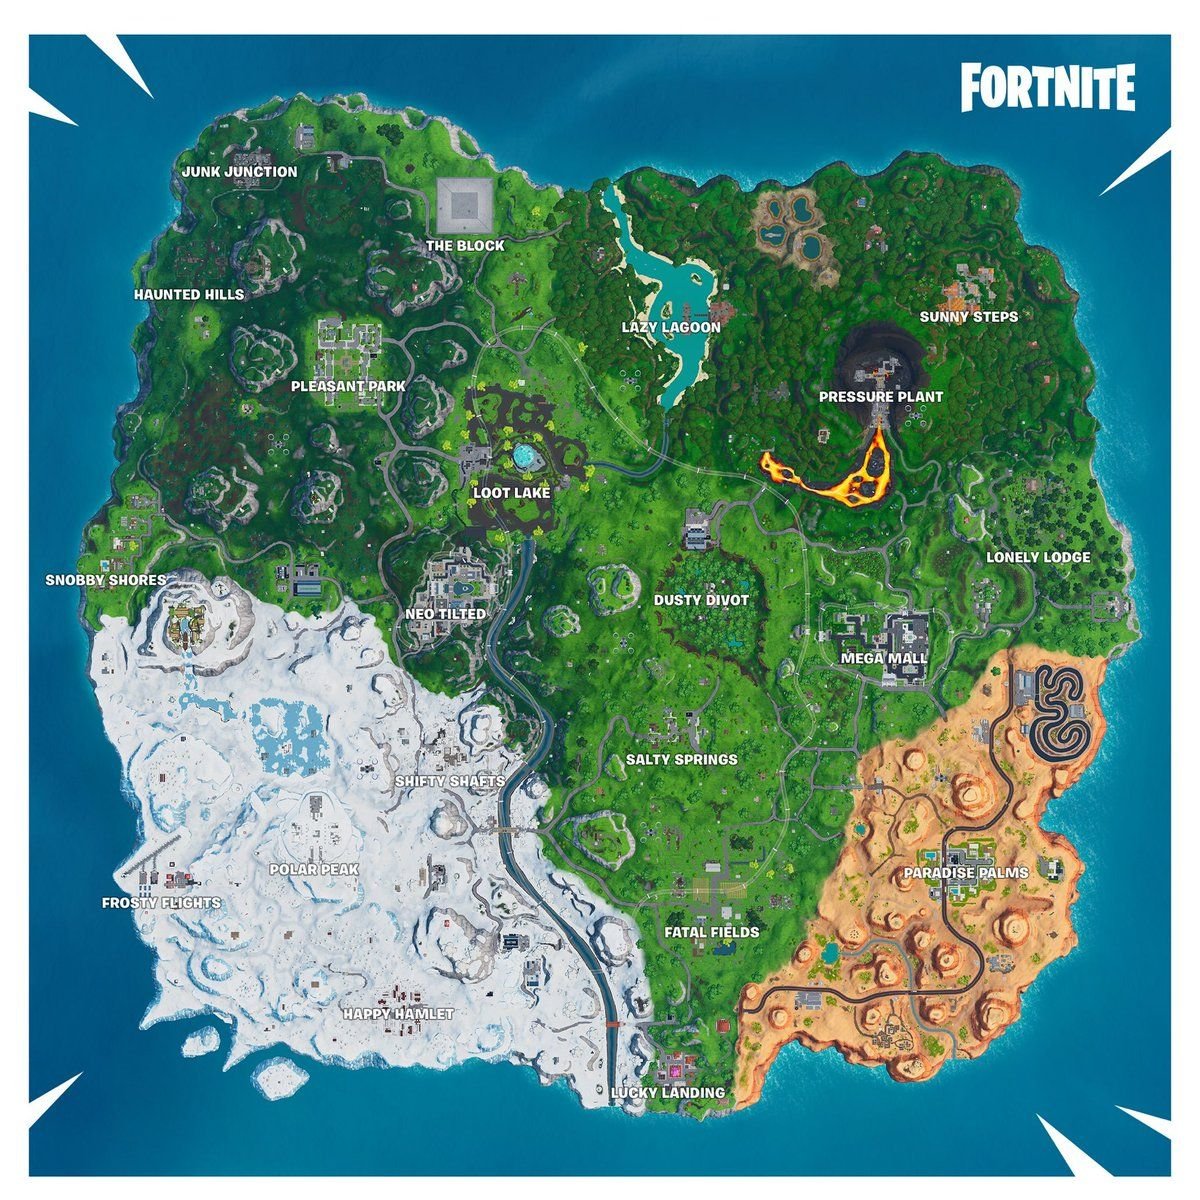 New Fortnite Discover Submission Process for Island and Maps